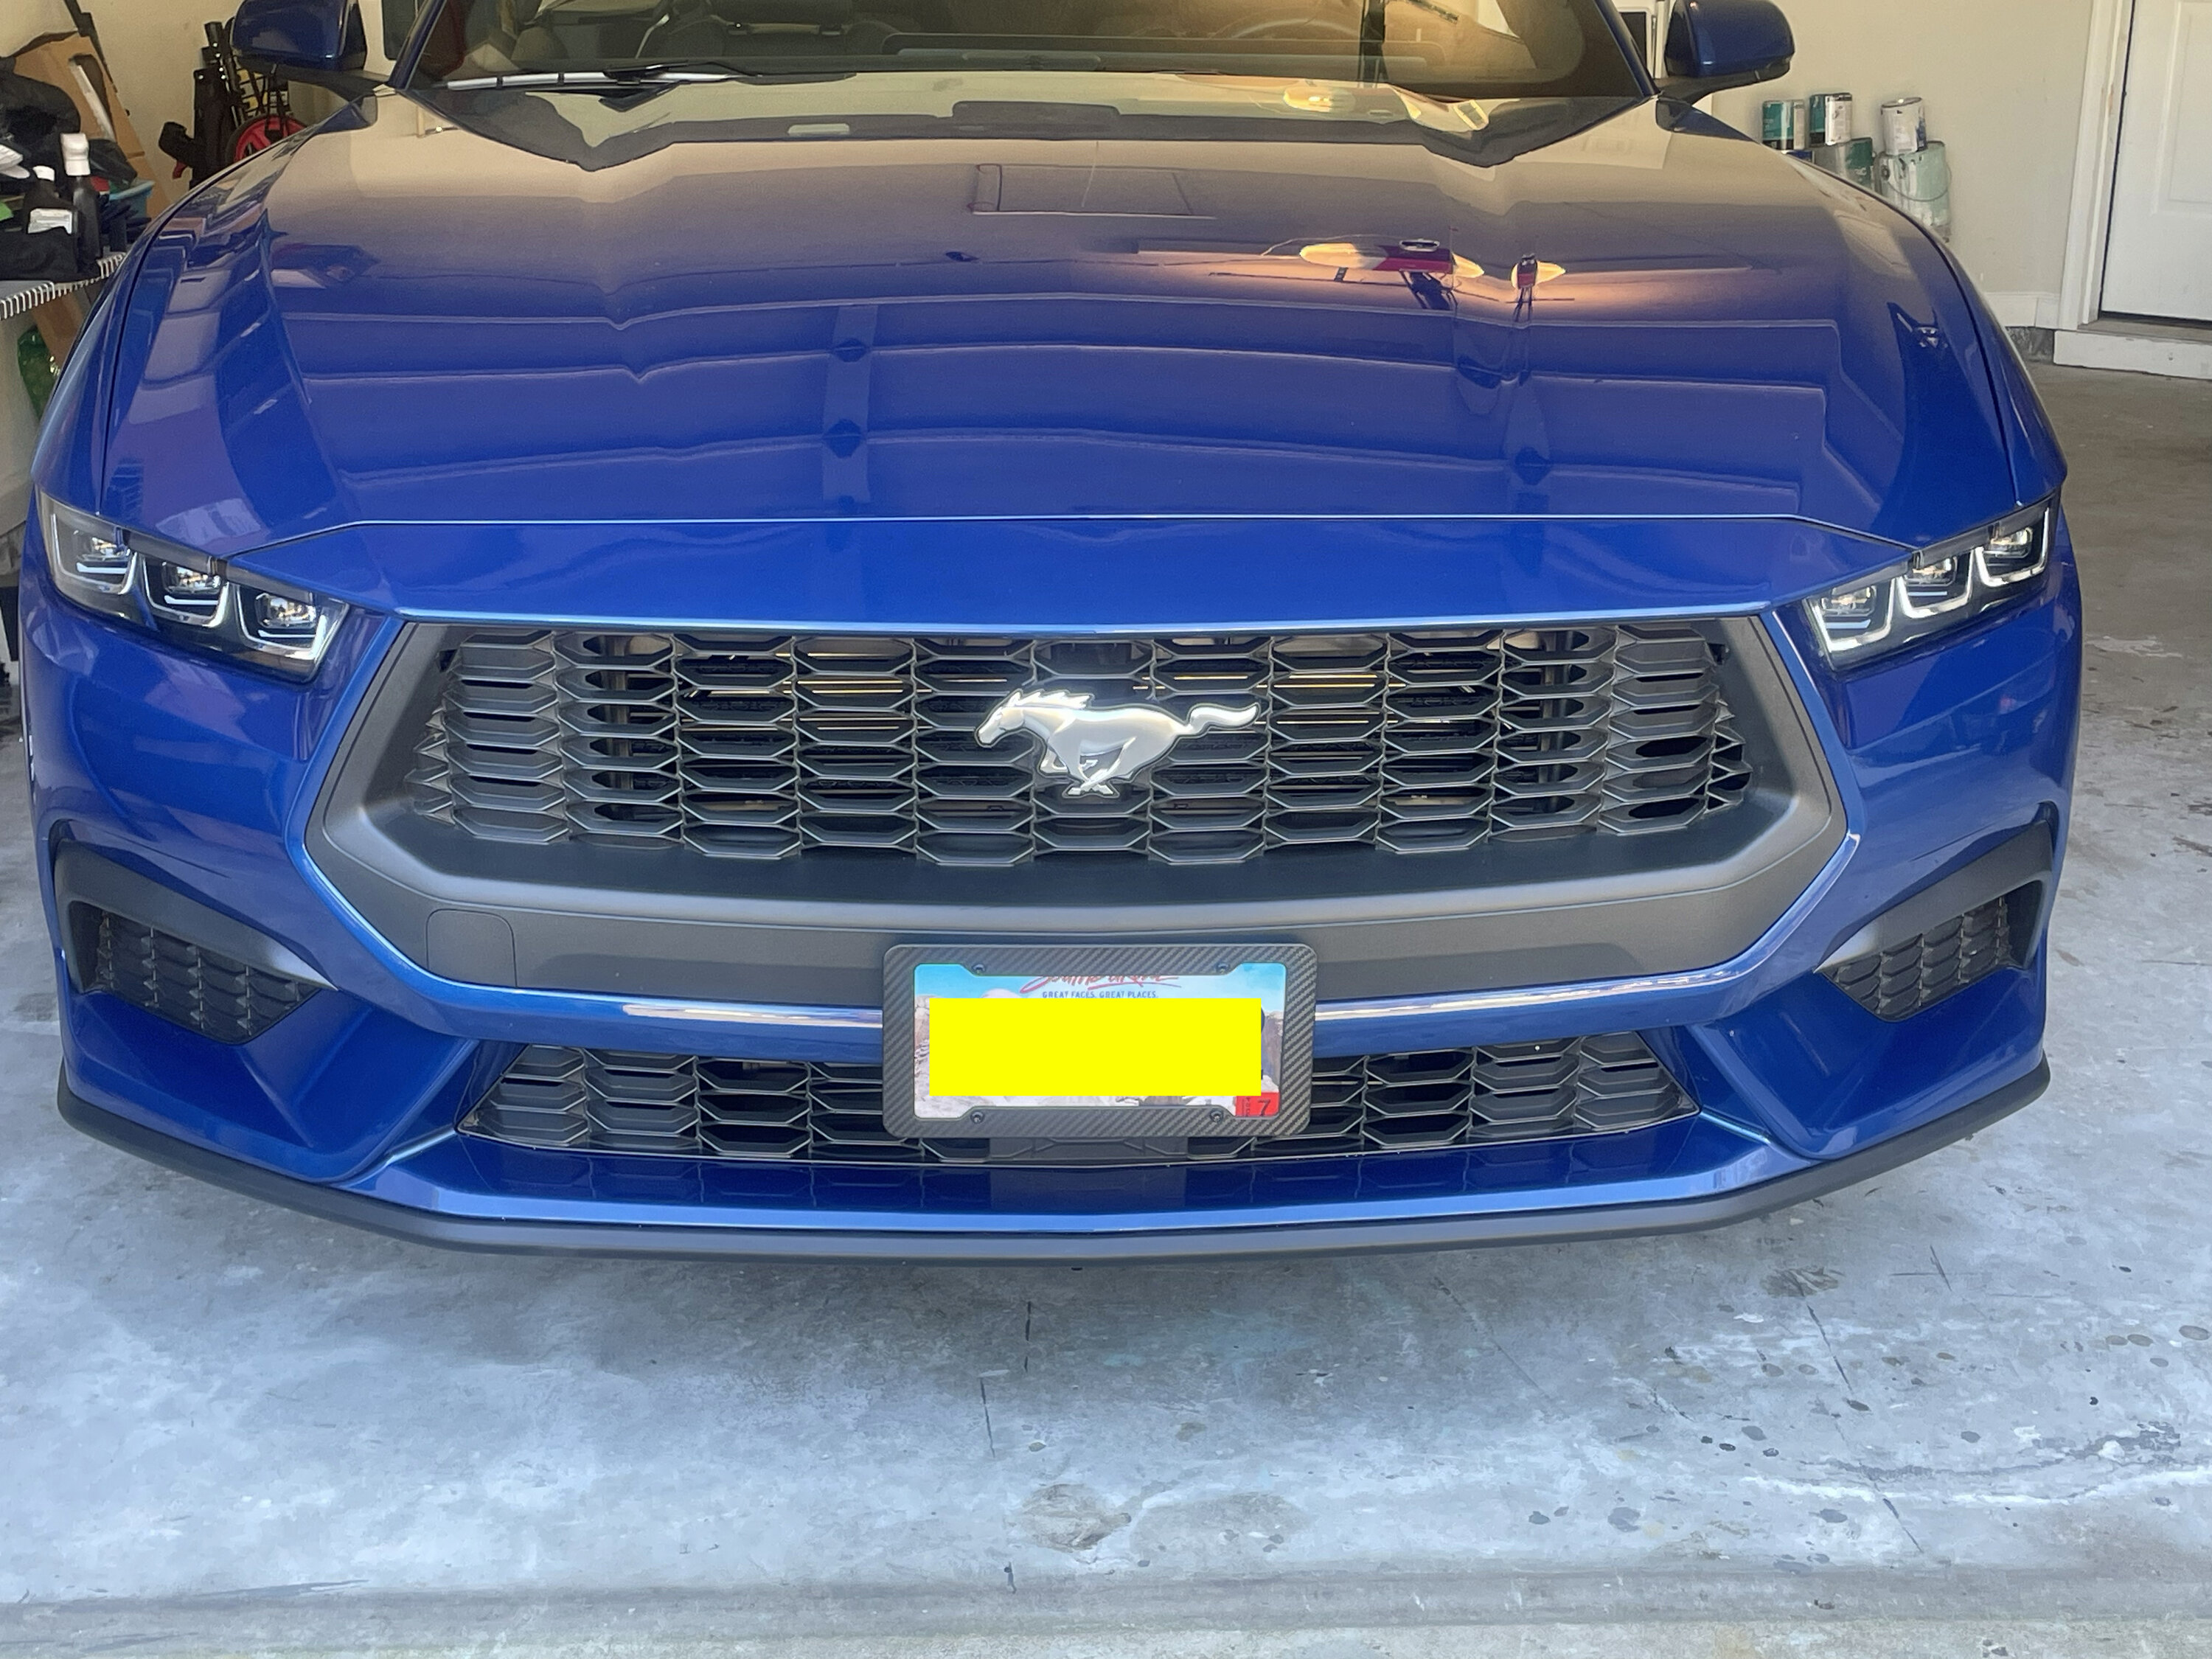 S650 Mustang Quality Issues? HoodGaps